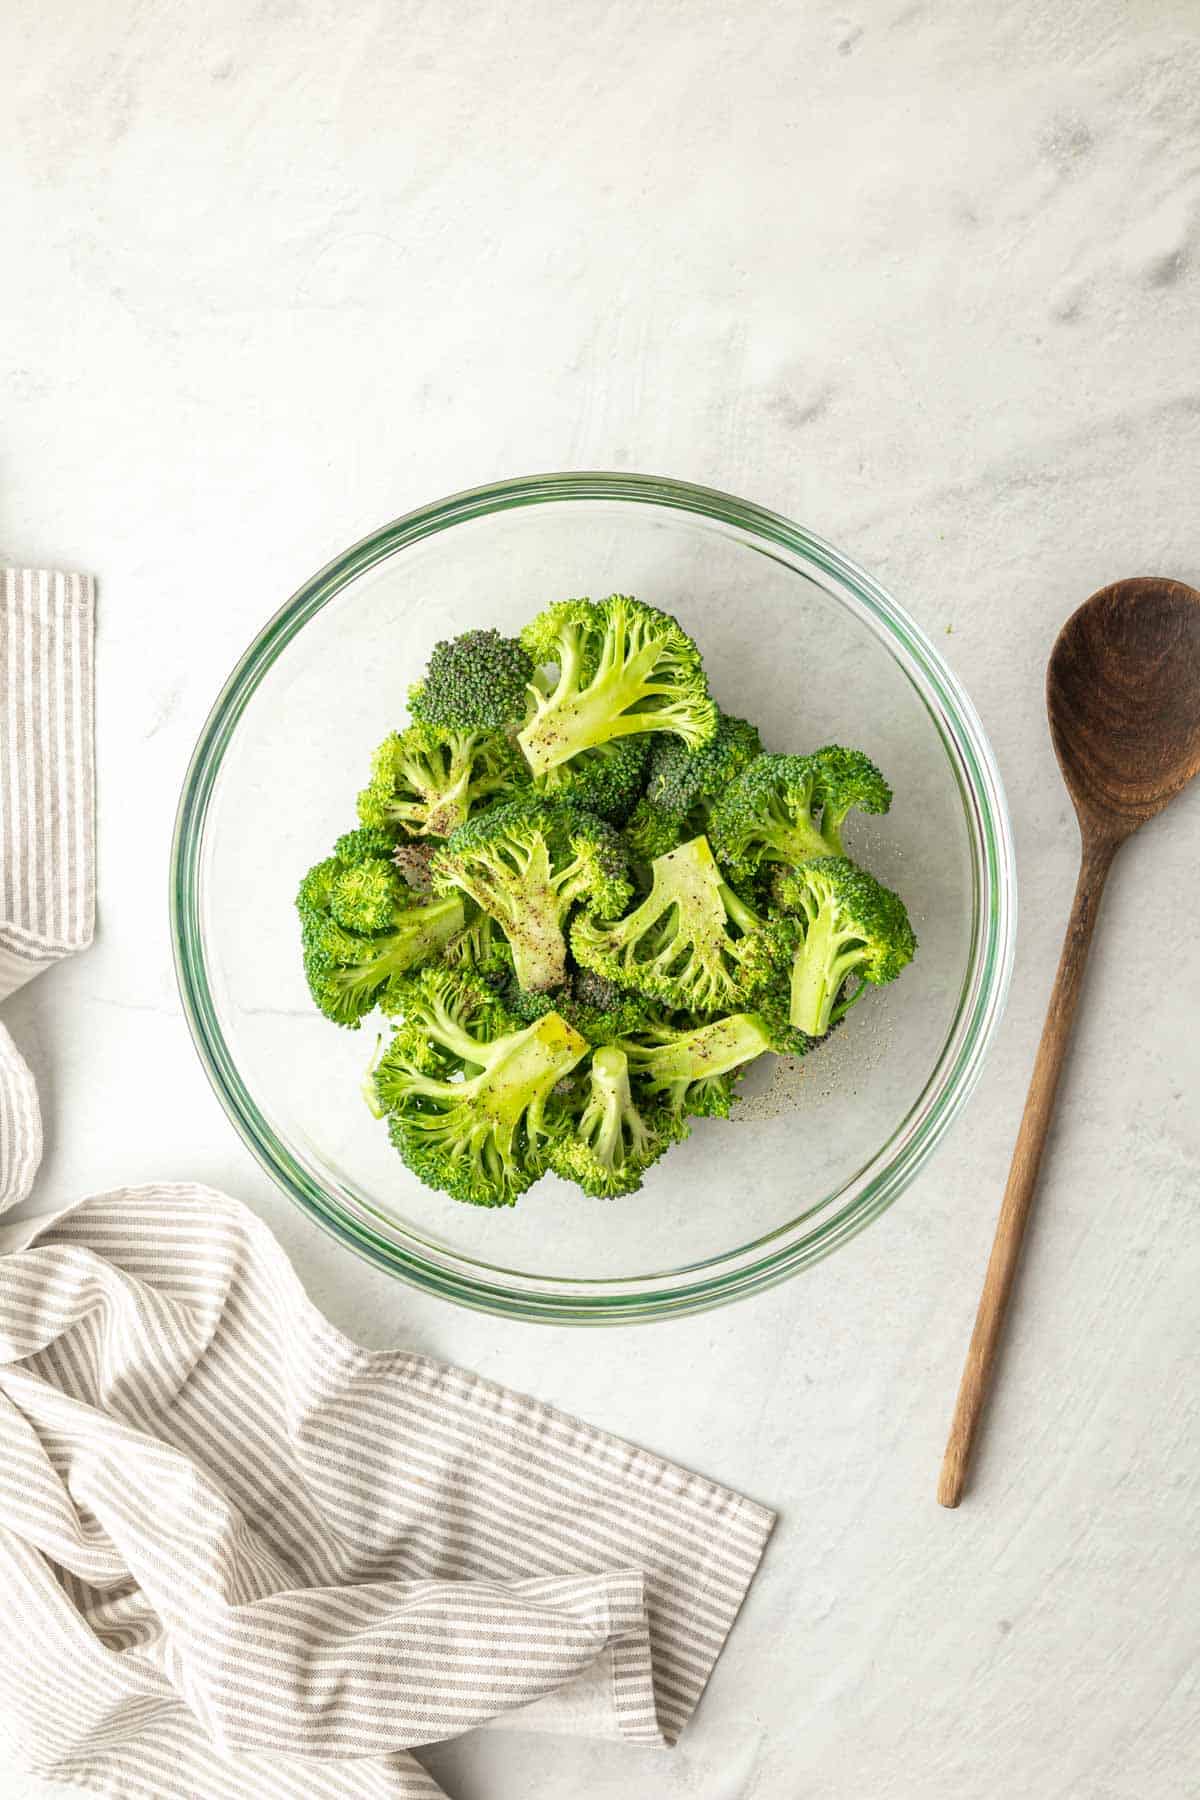 broccoli florets in a glass bowl with seasonings and a wooden spoon for mixing on one side